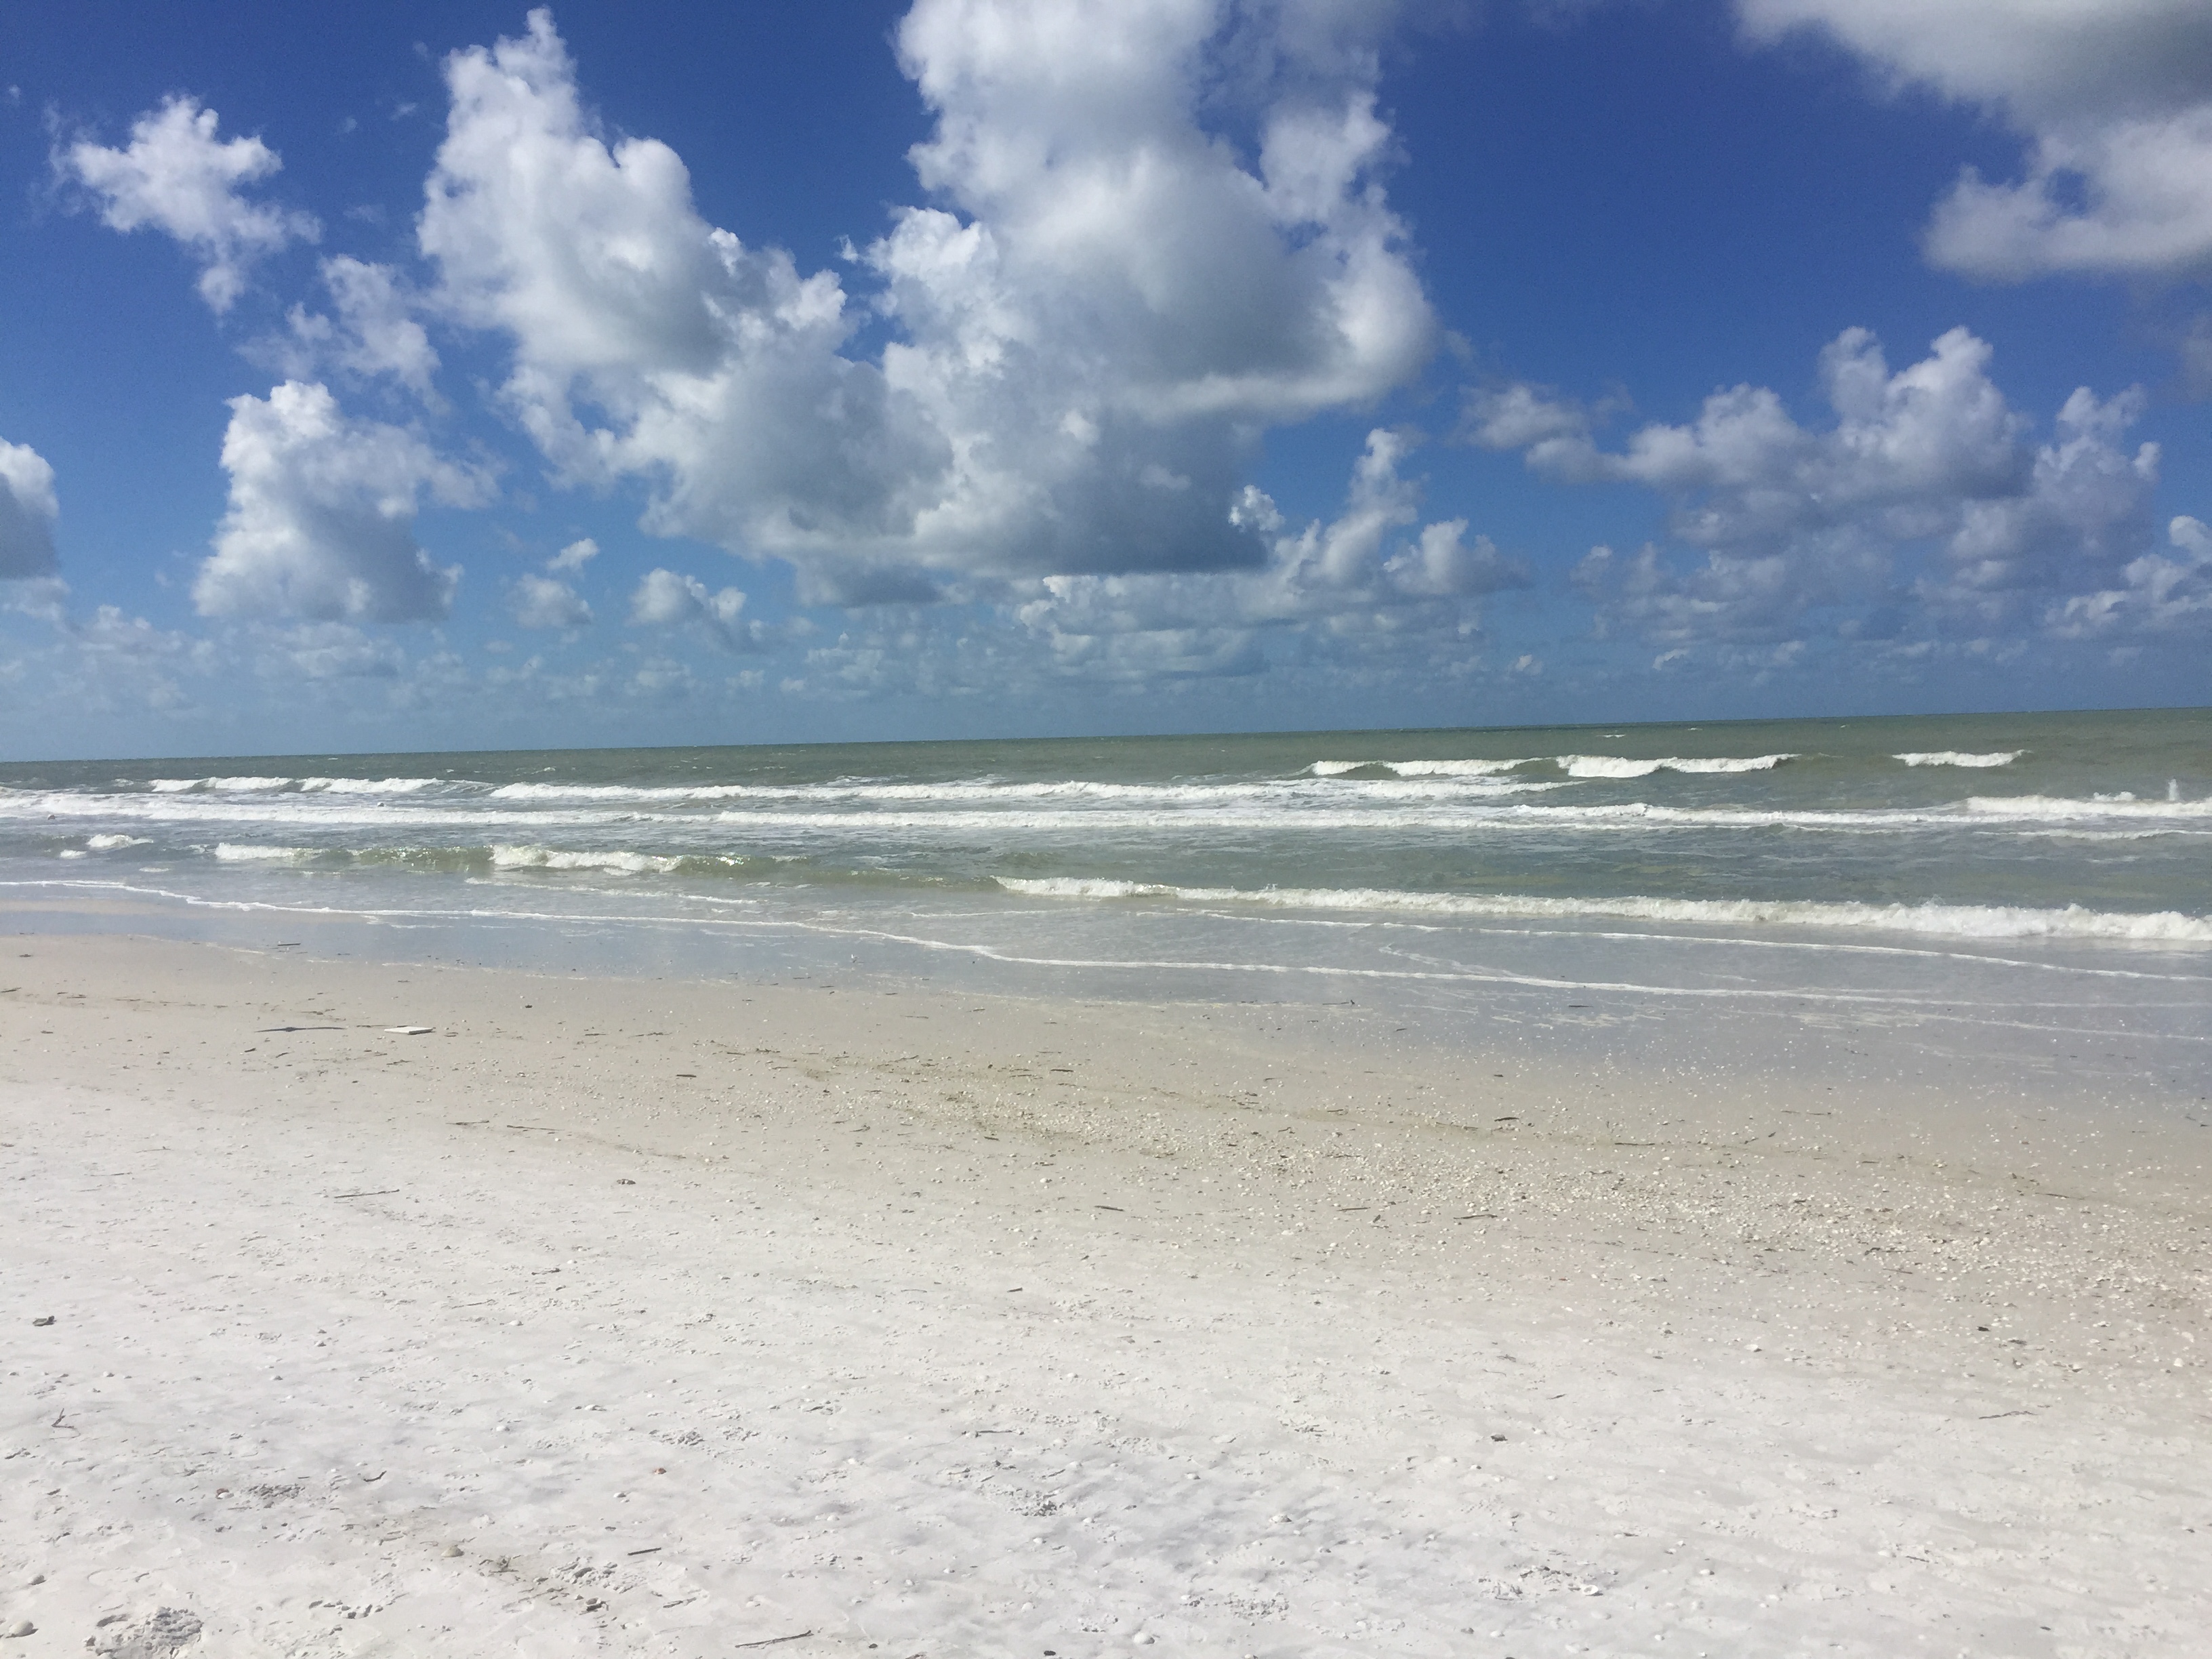 Rip current cancels swim portion of Marco Island race